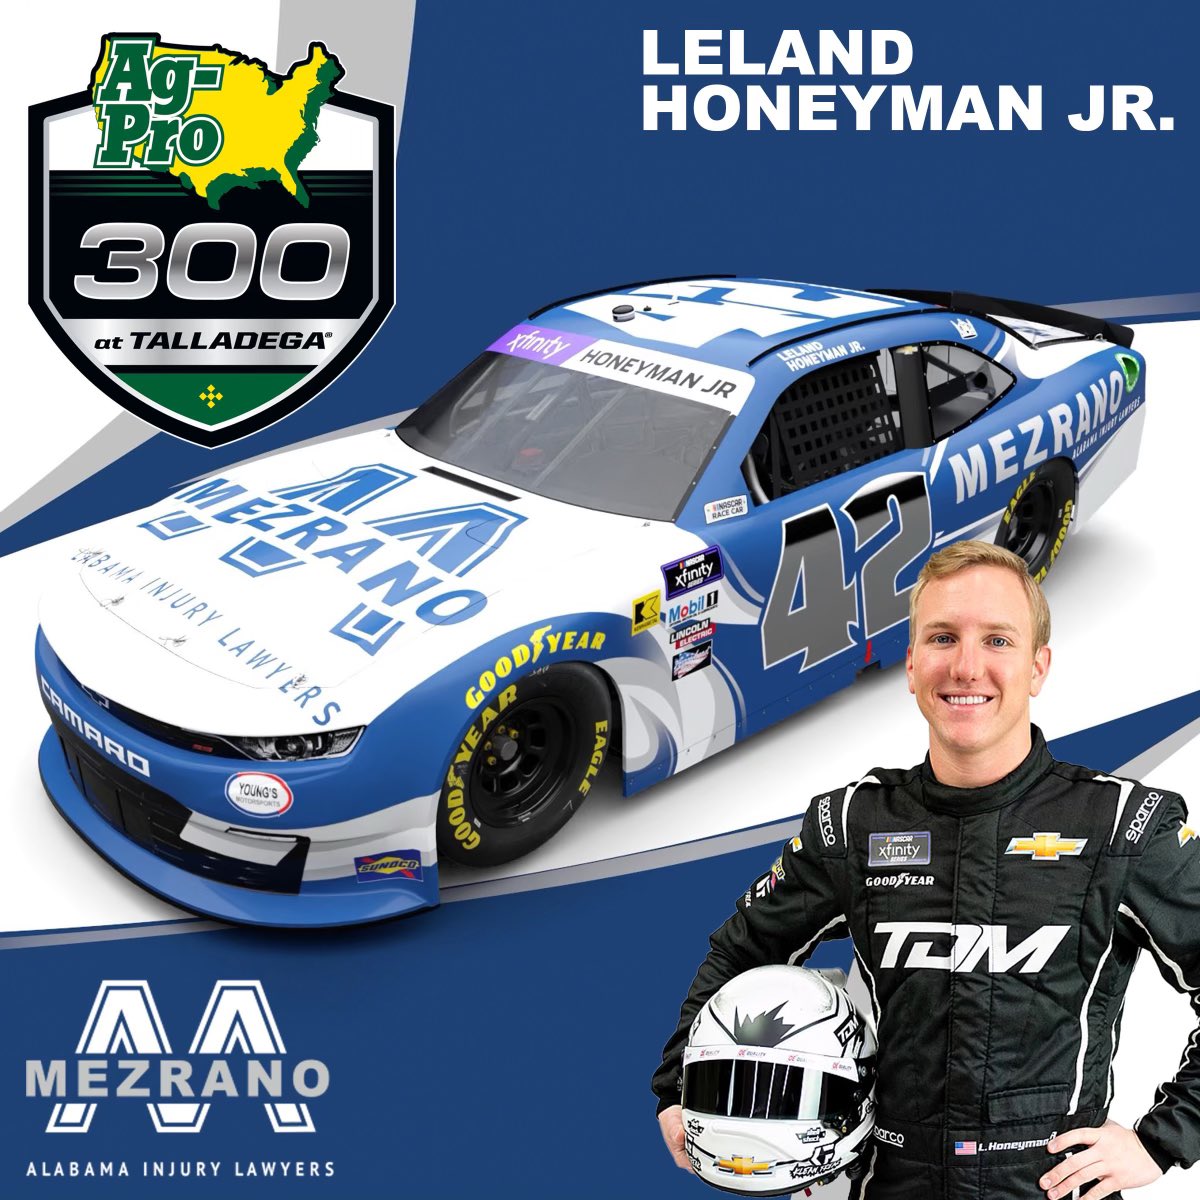 Excited to be partnering with @MezranoLaw this weekend in Talladega! Ready to get after it.